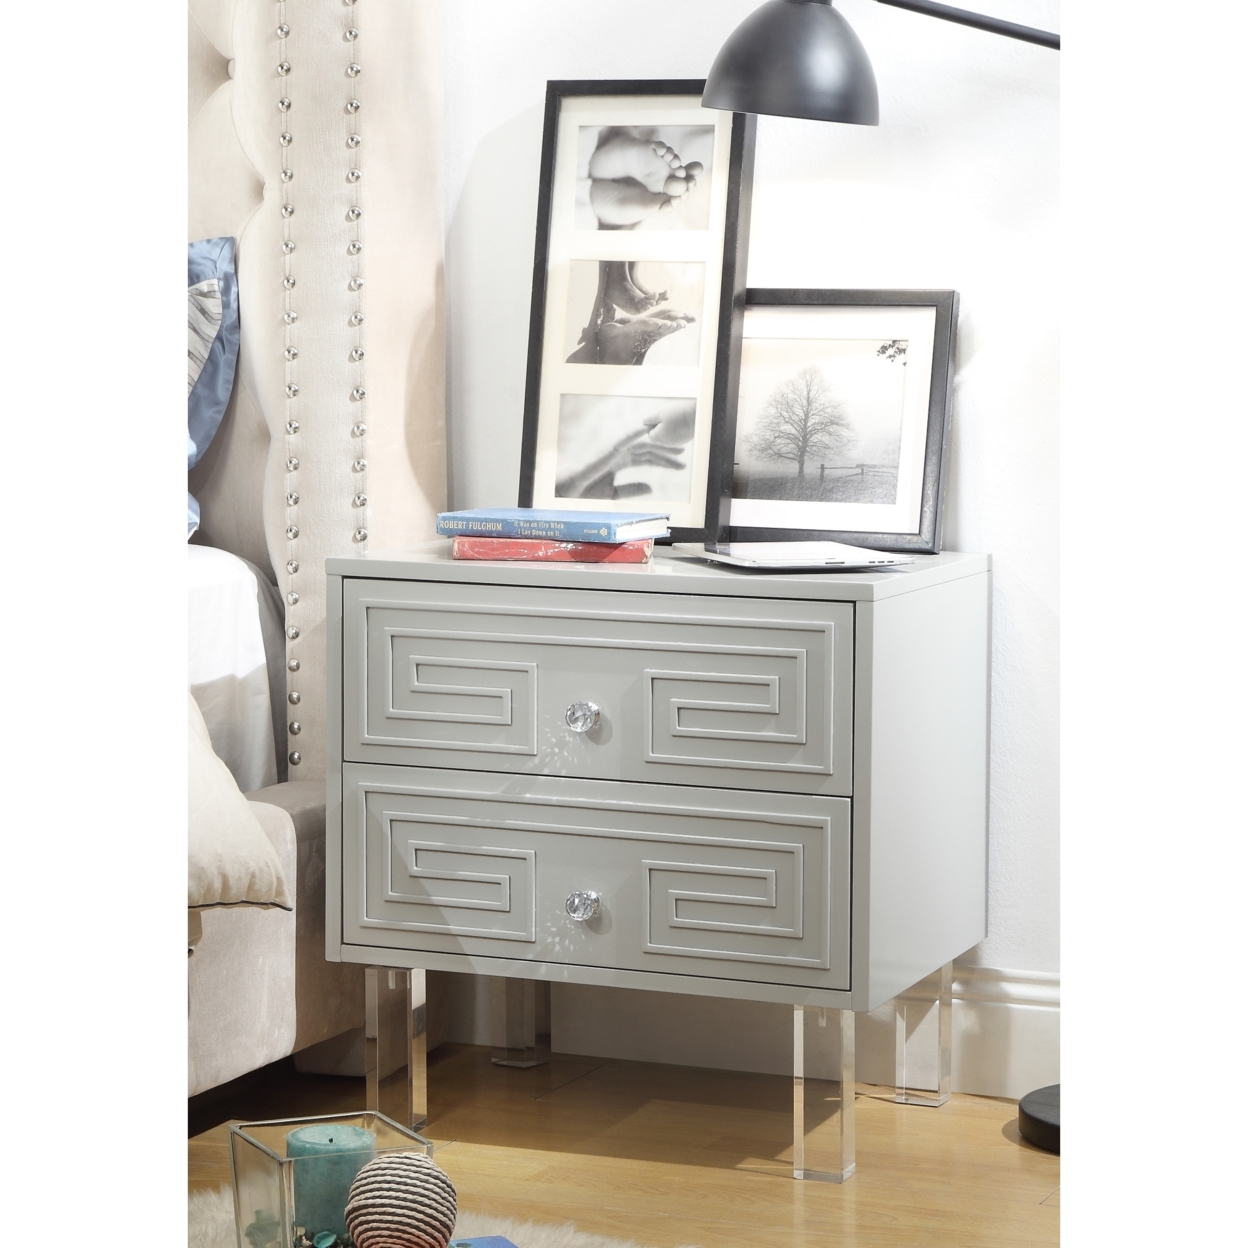 Lottie Glossy Nightstand-Lacquer Finish-Side Table-Acrylic Lucite Legs-Modern & Functional By Inspired Home - Light Grey